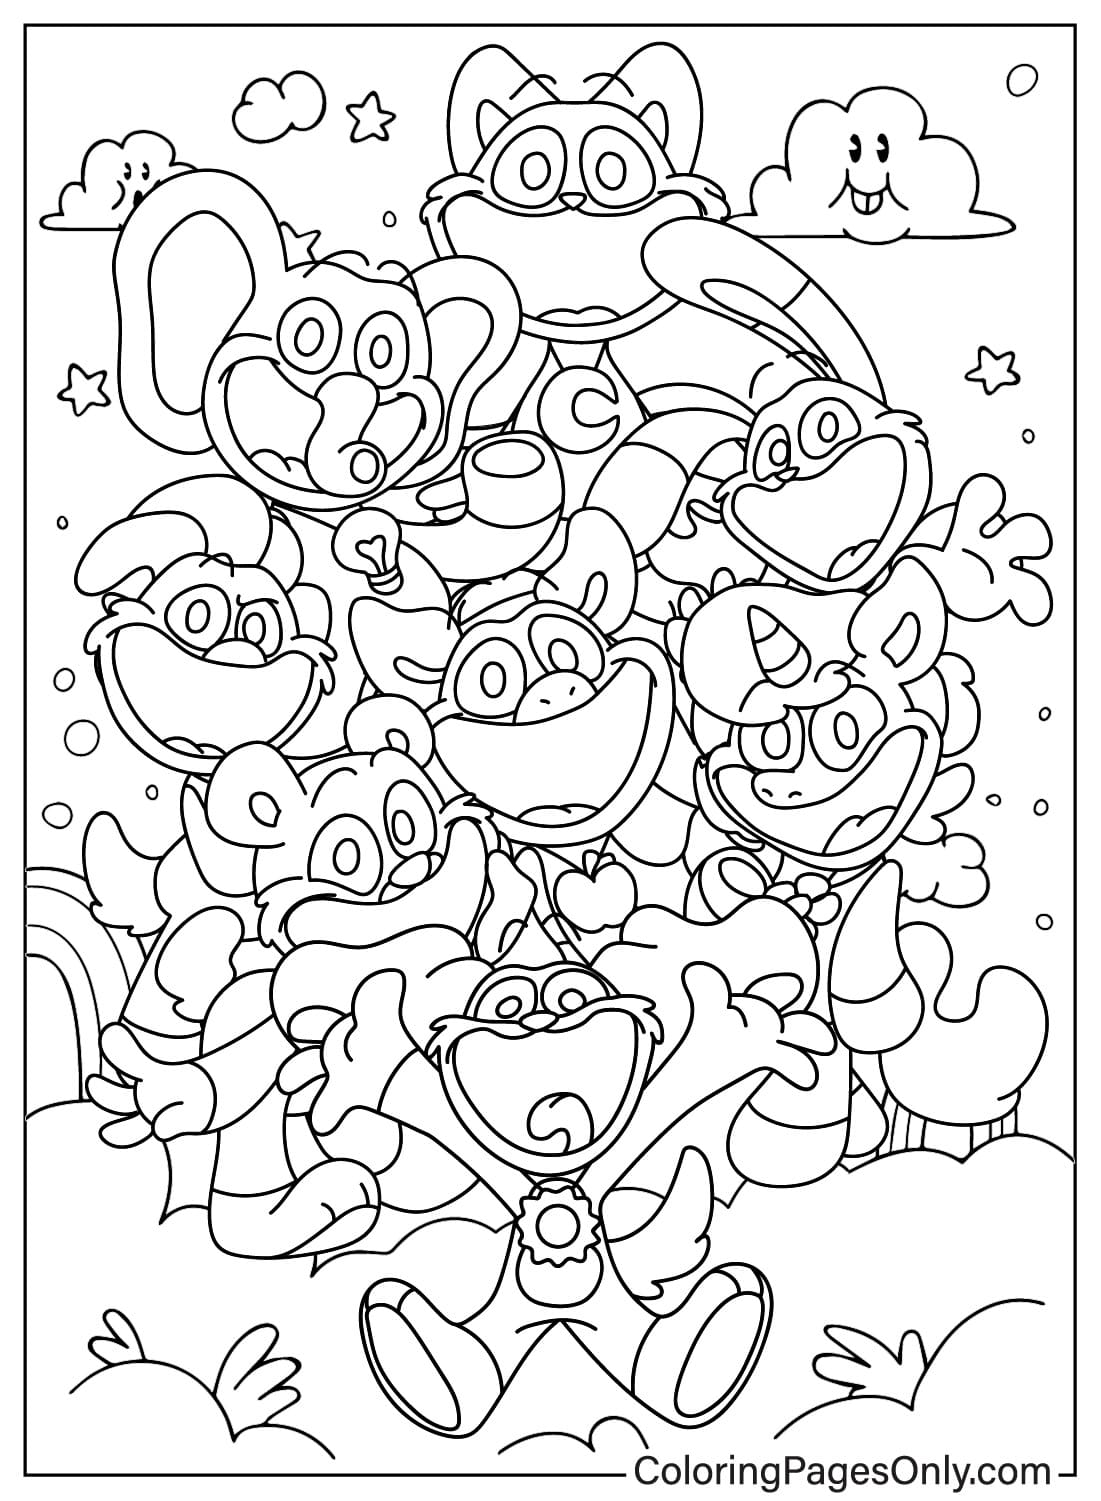 Free Smiling Critters Coloring Page from Poppy Playtime